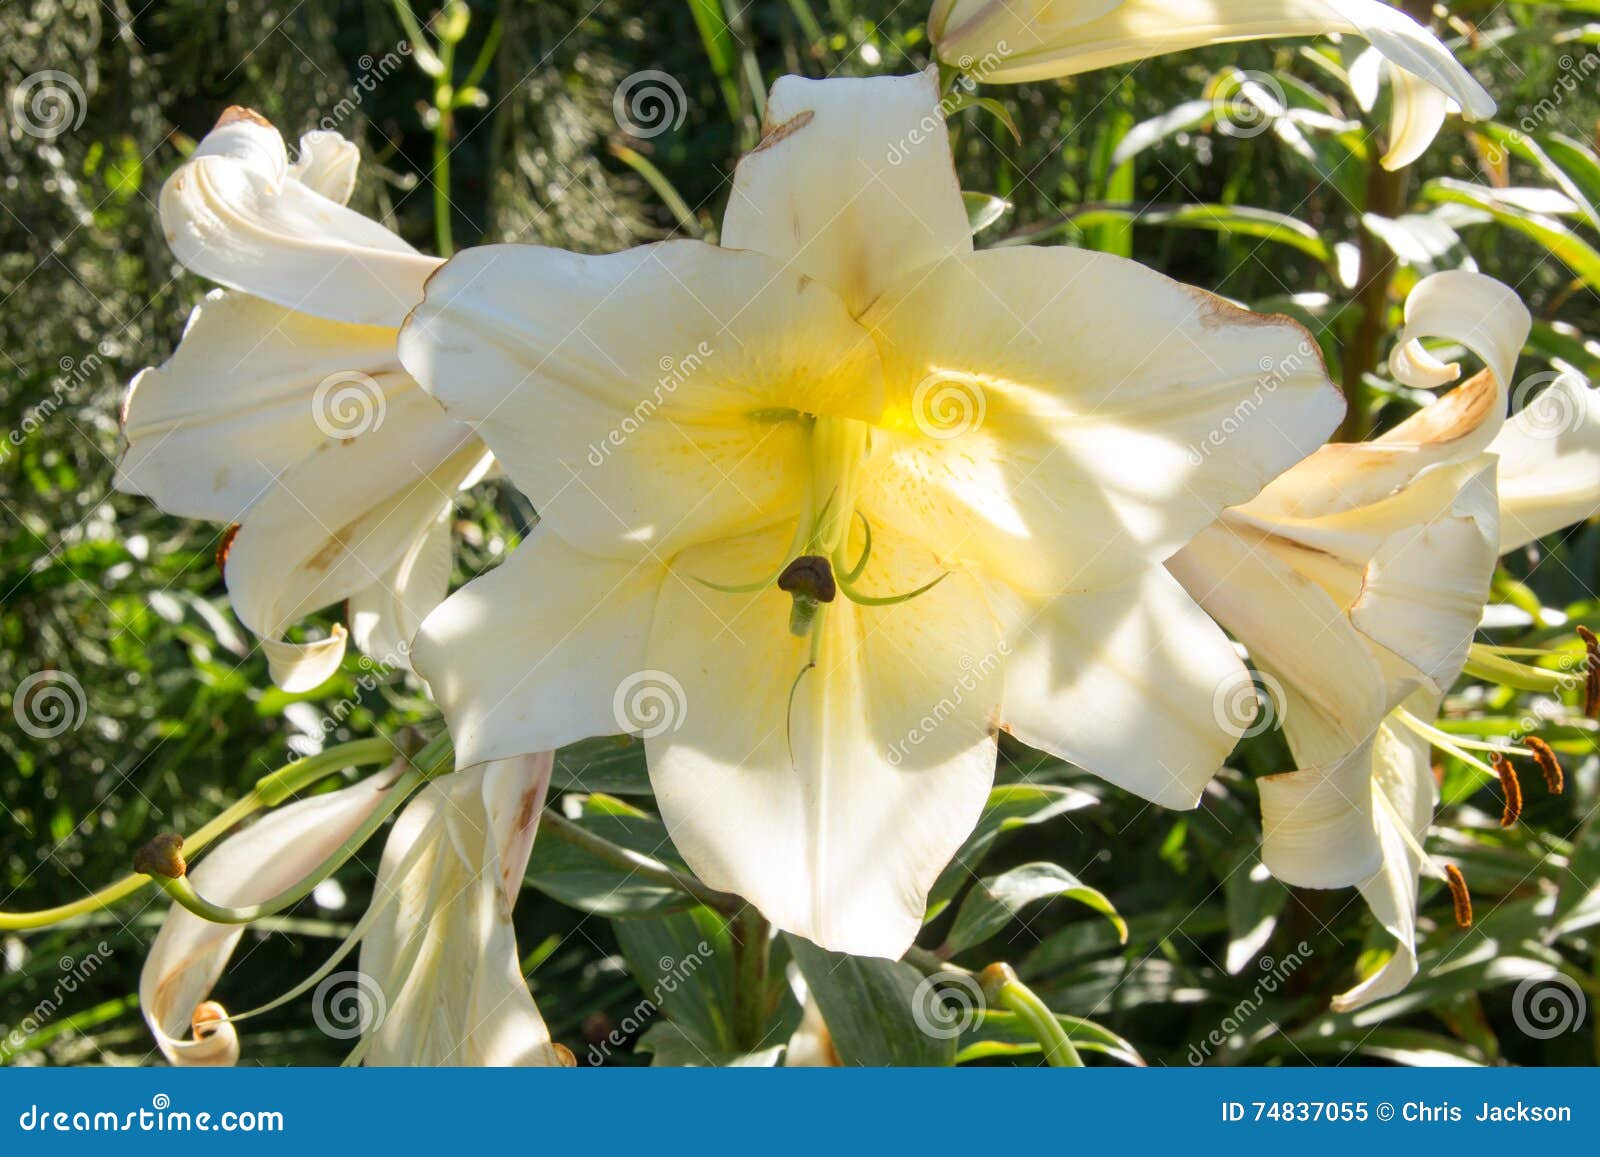 Triple White Flower Group stock image. Image of pink - 74837055